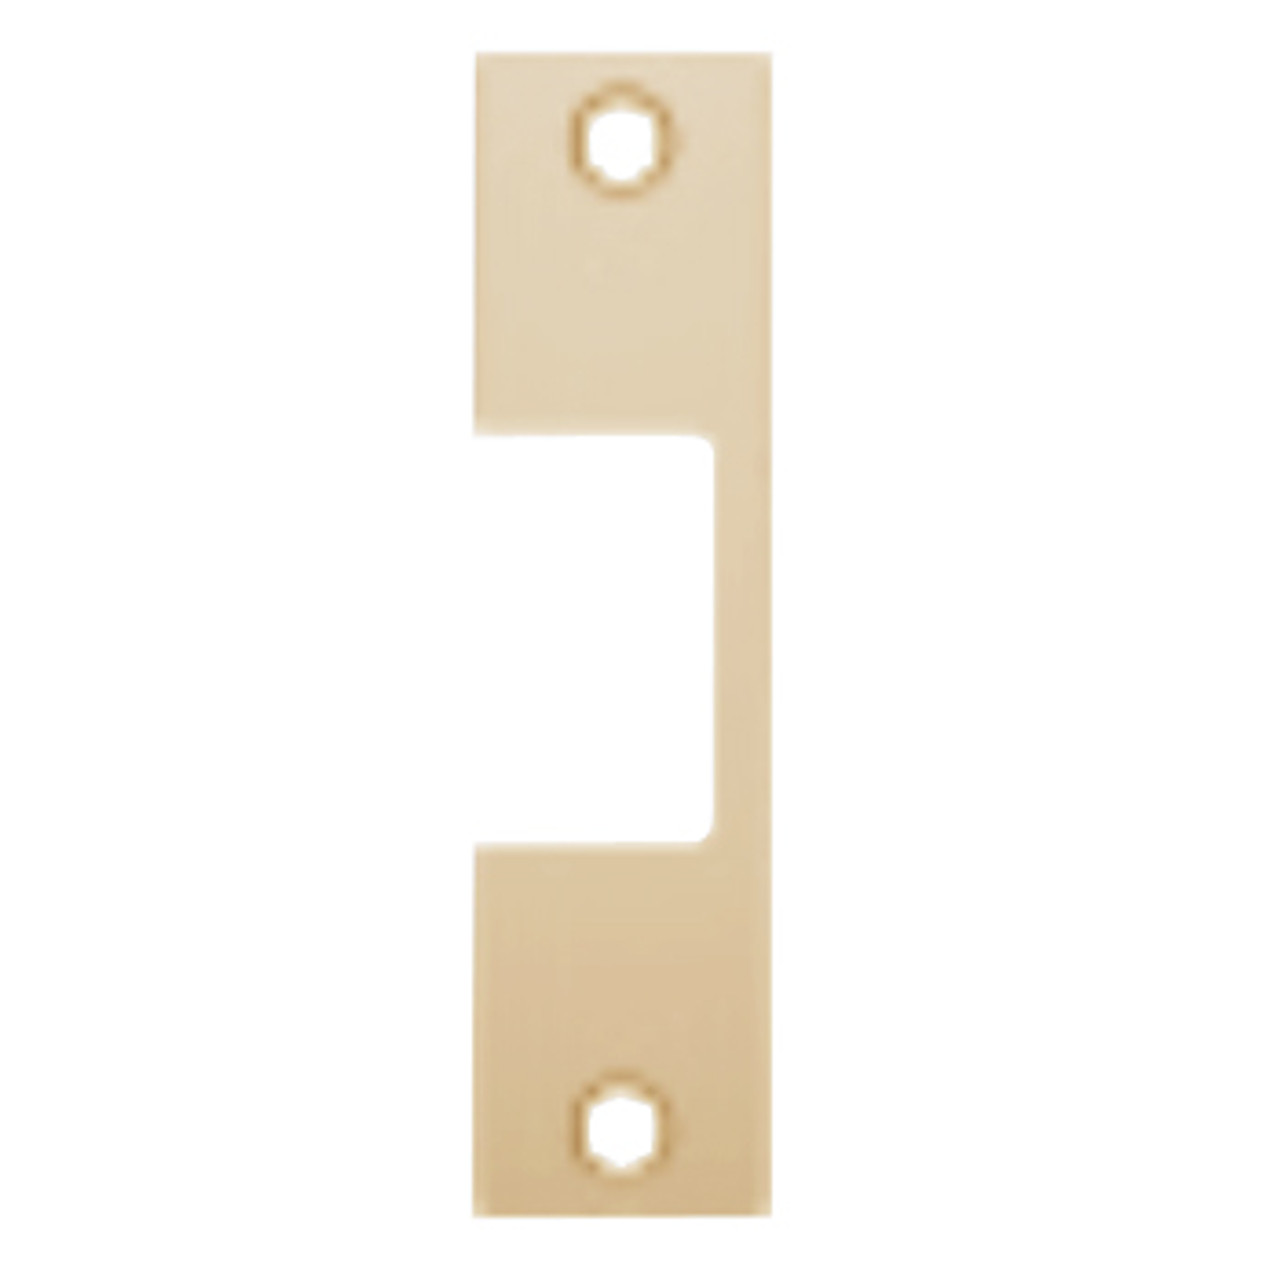 J-612 Hes 4-7/8" x 1-1/4" Faceplate in Satin Bronze Finish